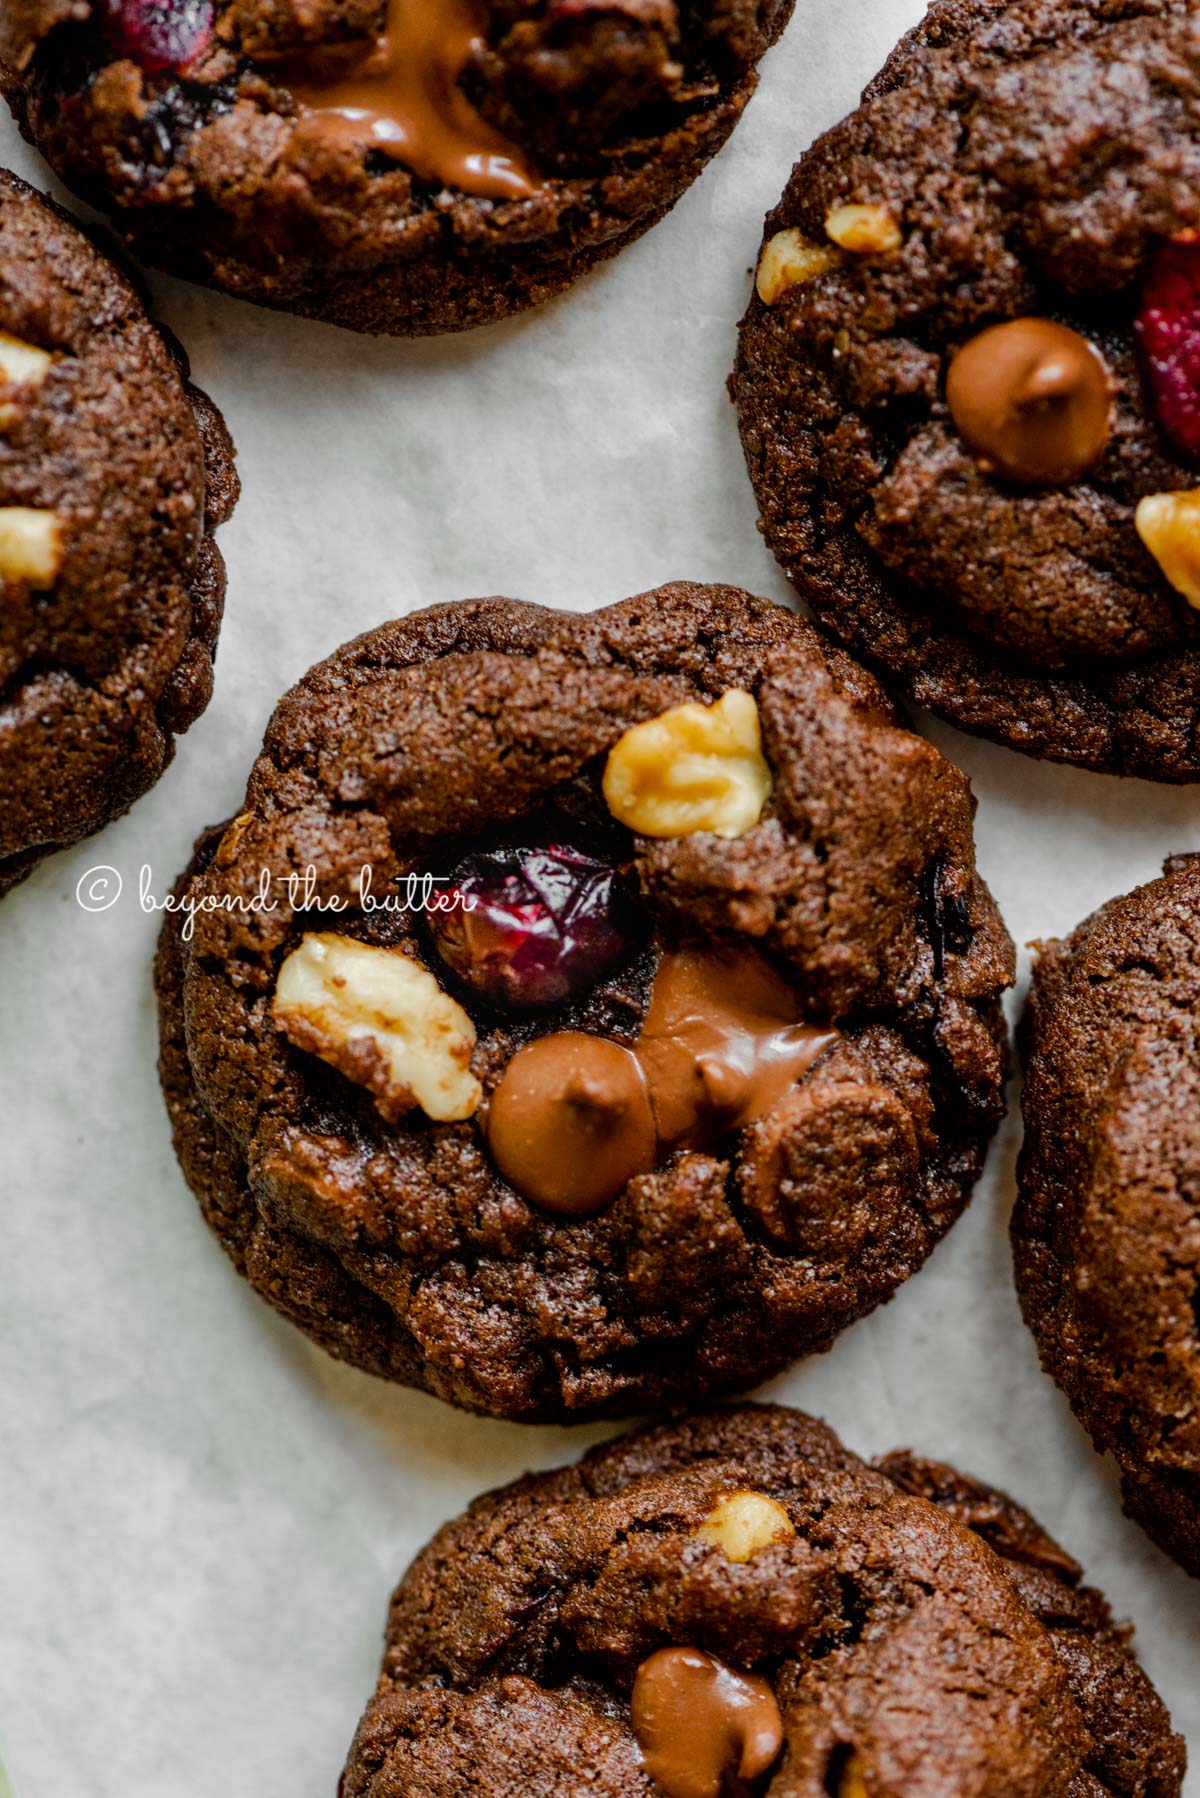 Dark chocolate cranberry walnut cookies on light gray background | All Images © Beyond the Butter®